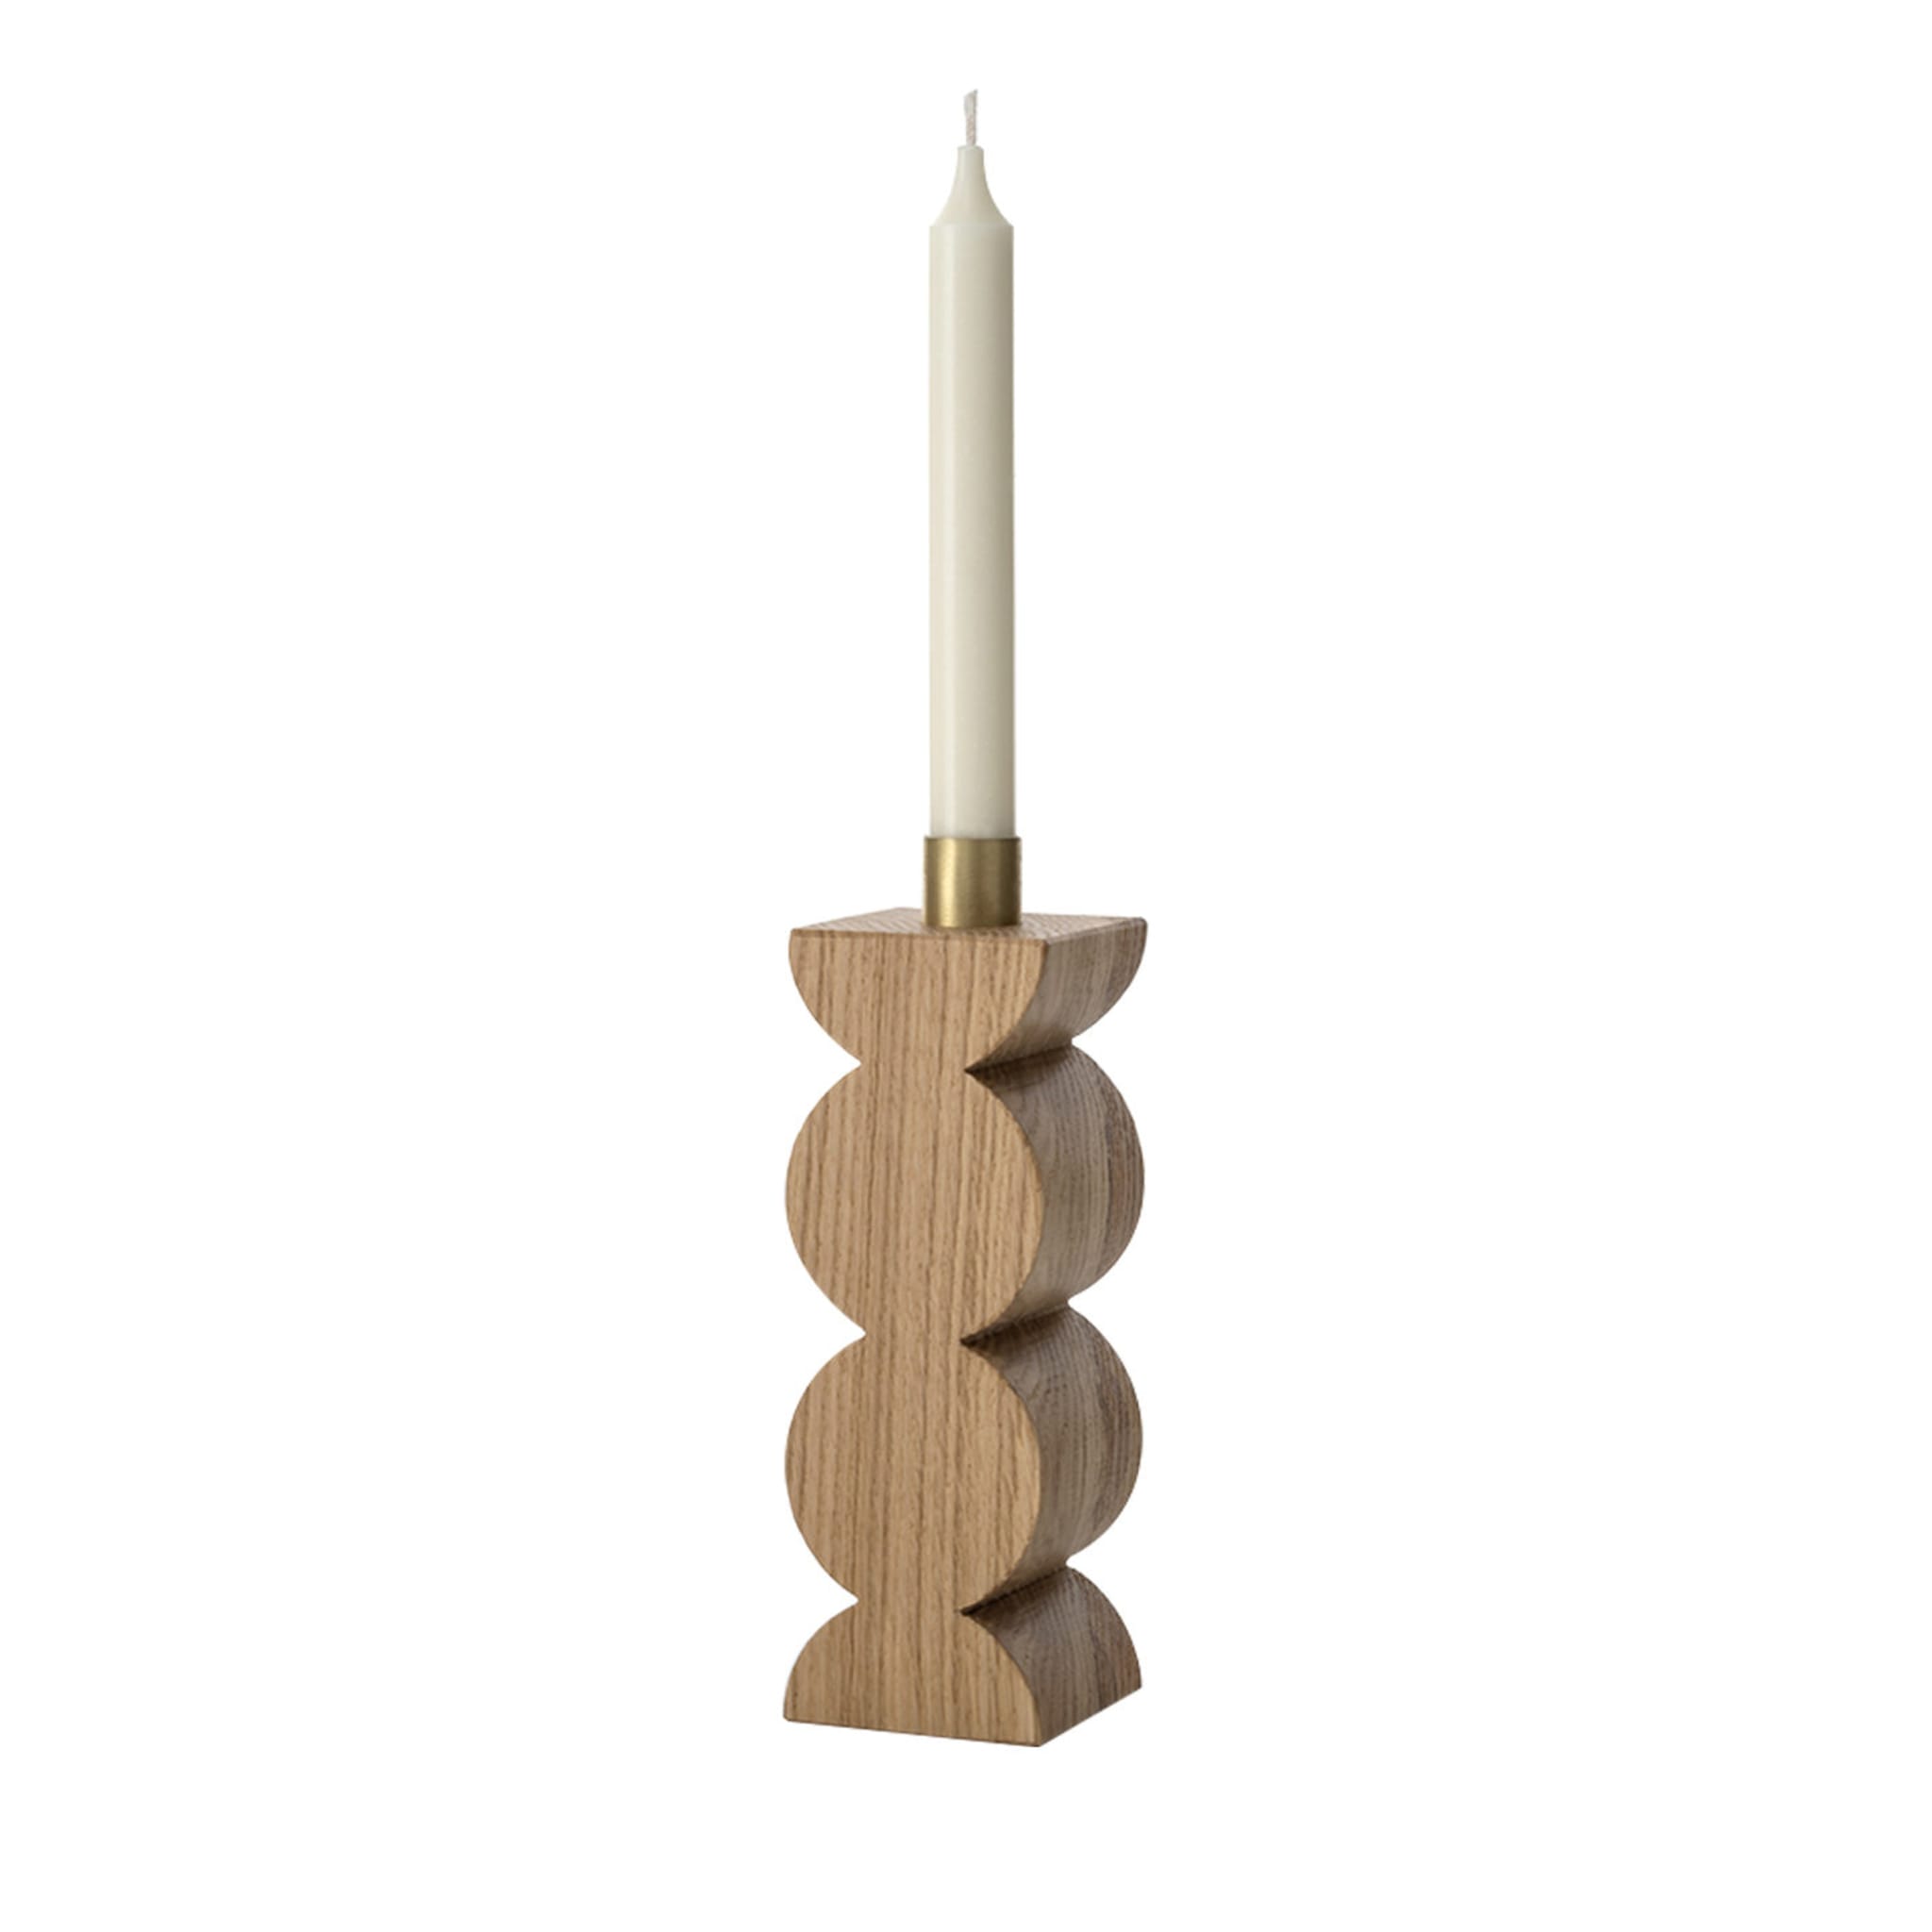 Constantin Oak Candle Holder by Agustina Bottoni - Main view